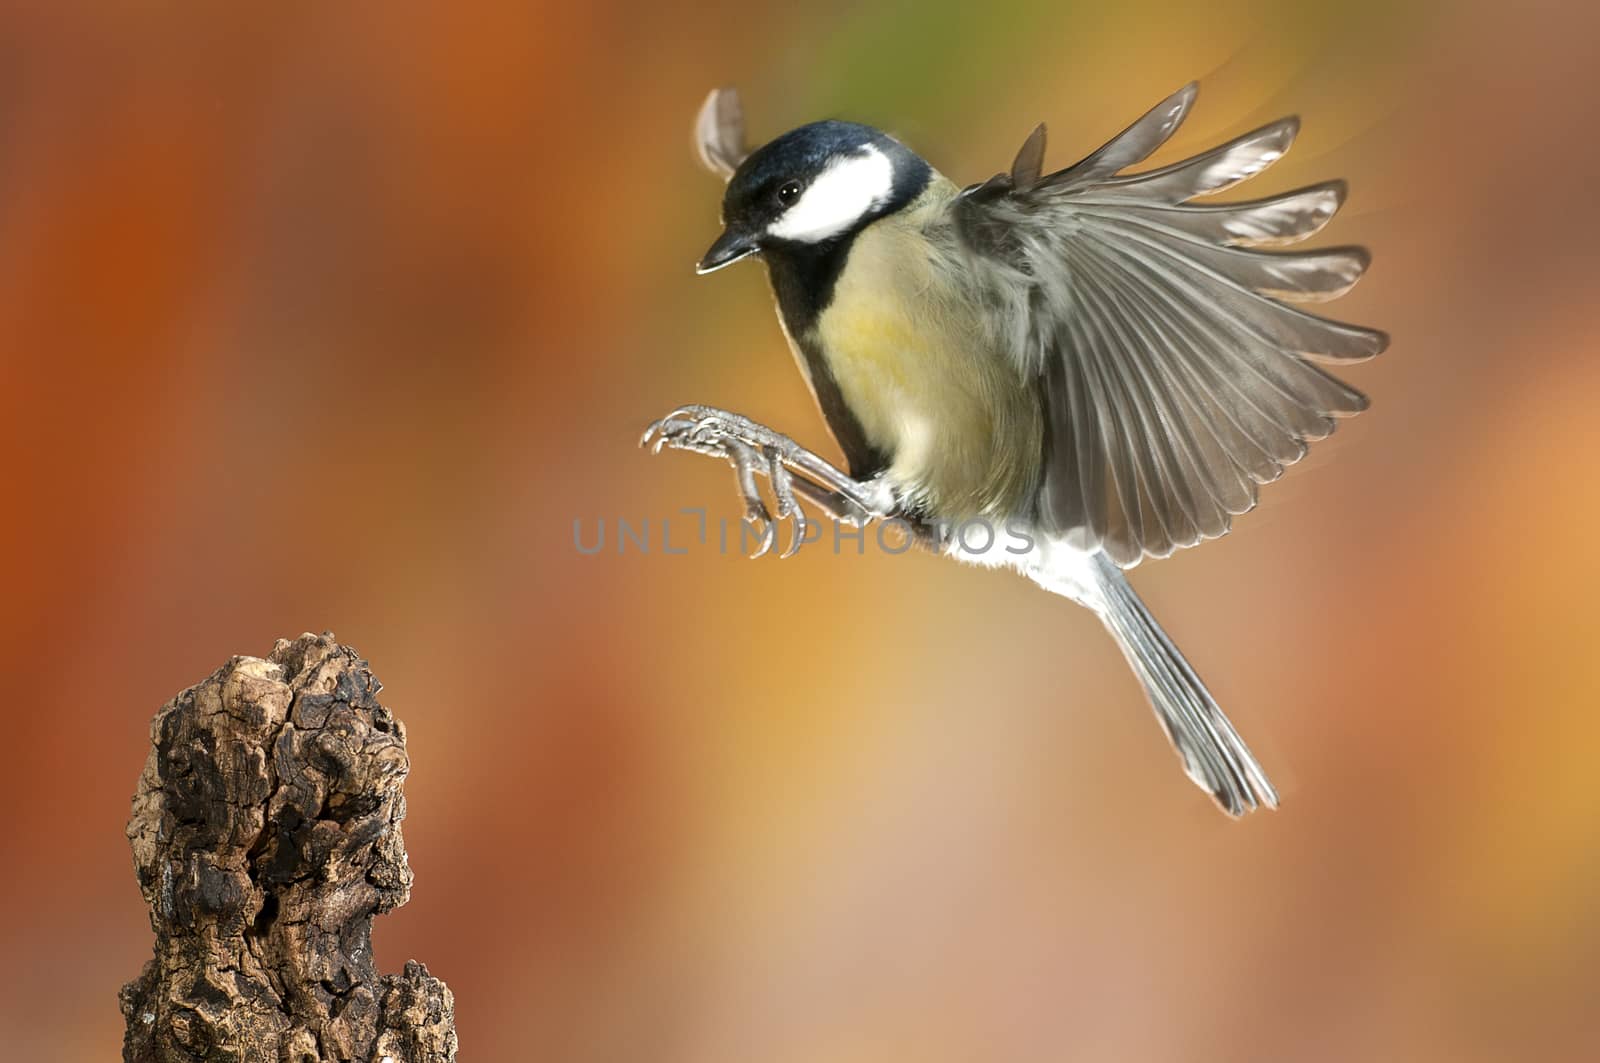 Great tit (Parus major). Garden bird, flying and fall colors, in flight